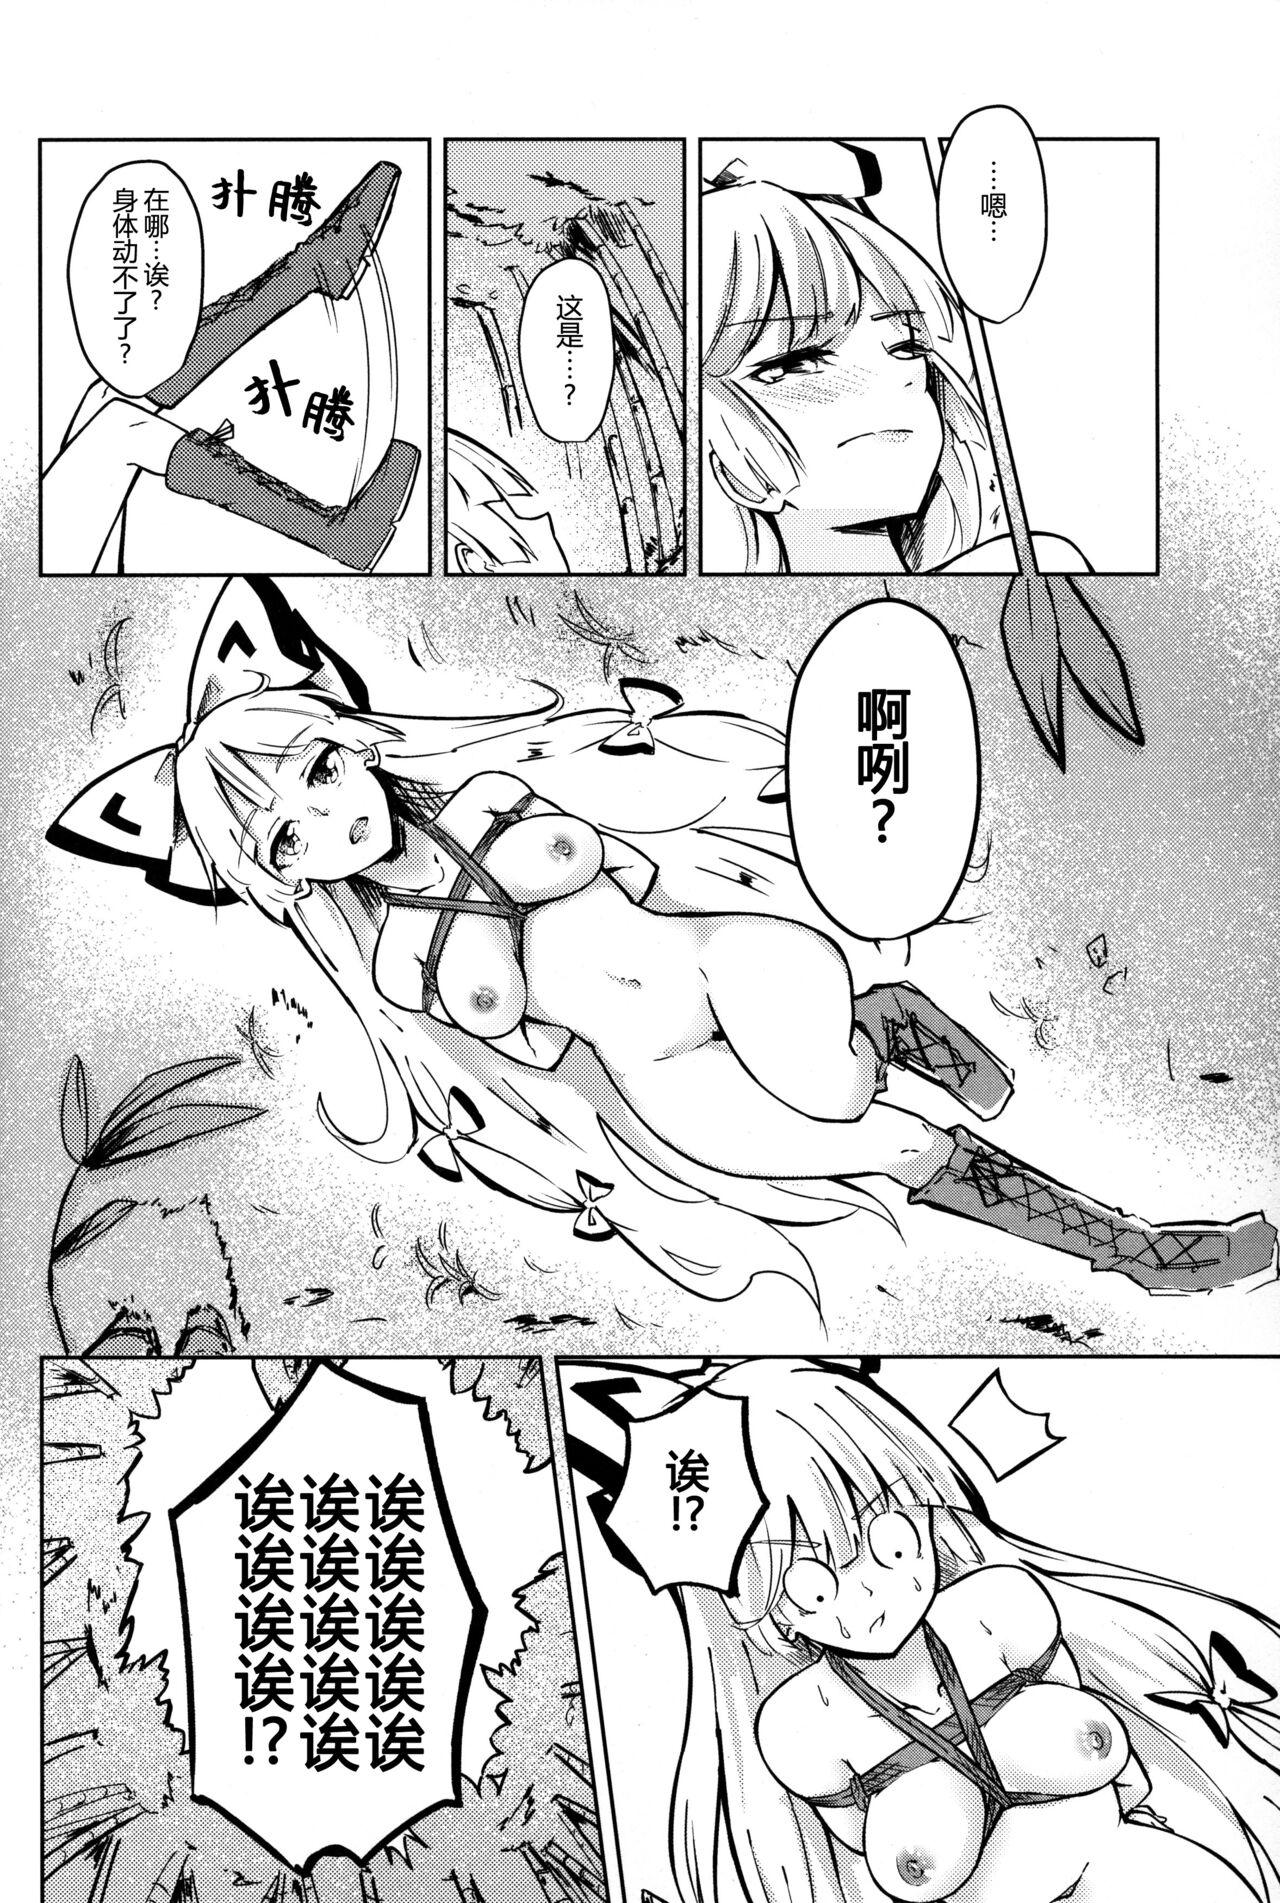 Tight Pussy Porn Chikurin Running | 竹林 Running - Touhou project Public Sex - Page 5